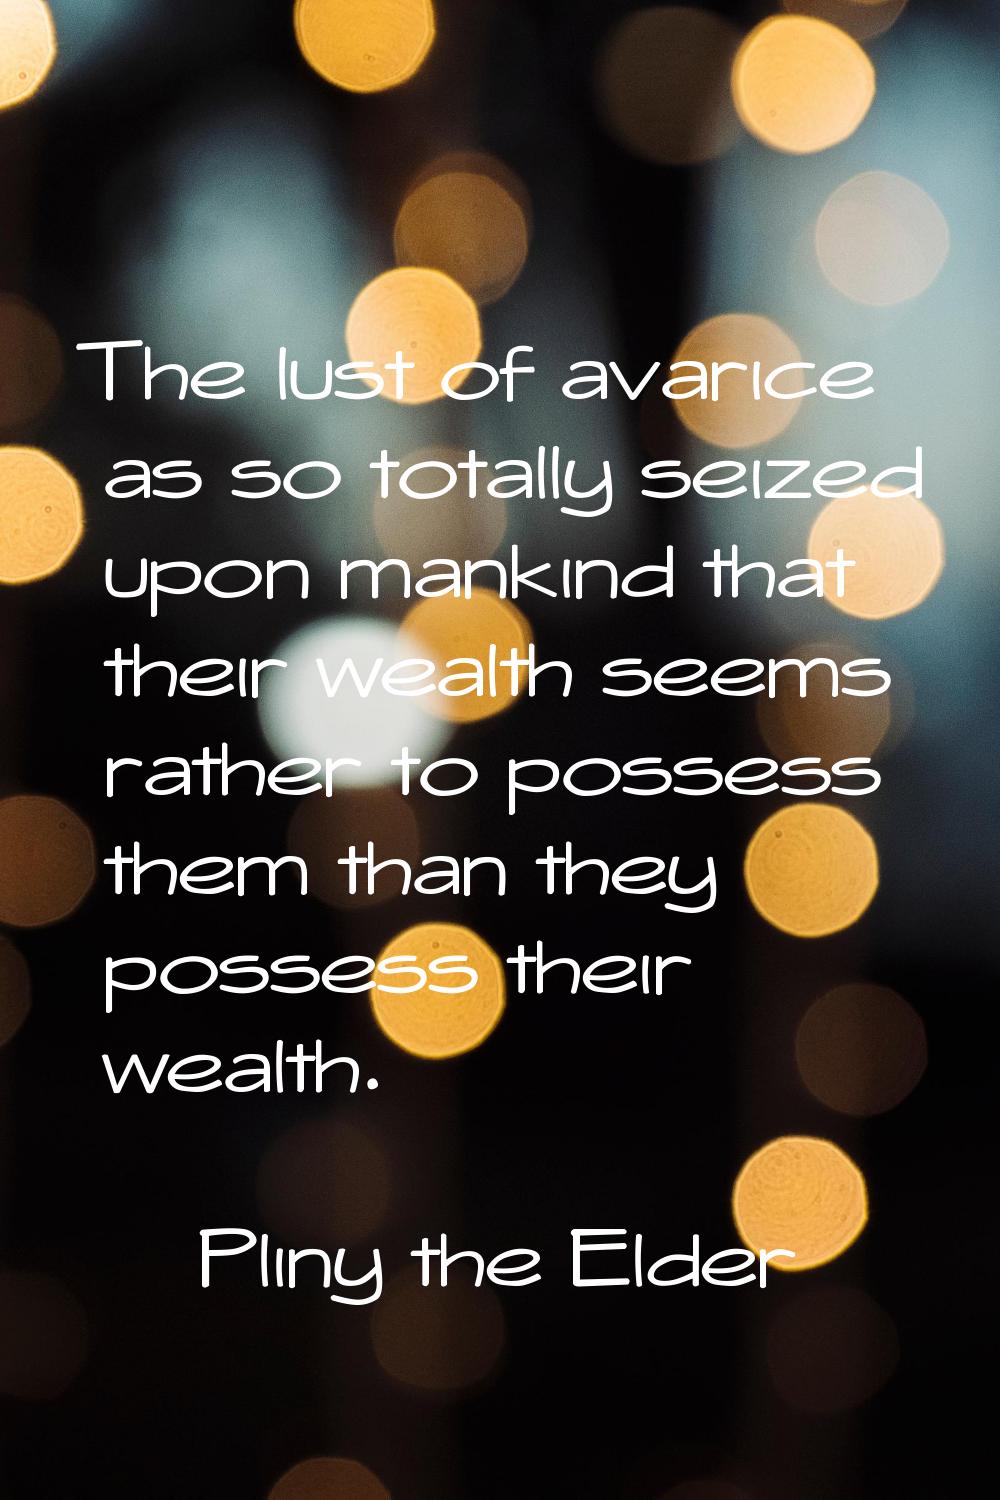 The lust of avarice as so totally seized upon mankind that their wealth seems rather to possess the